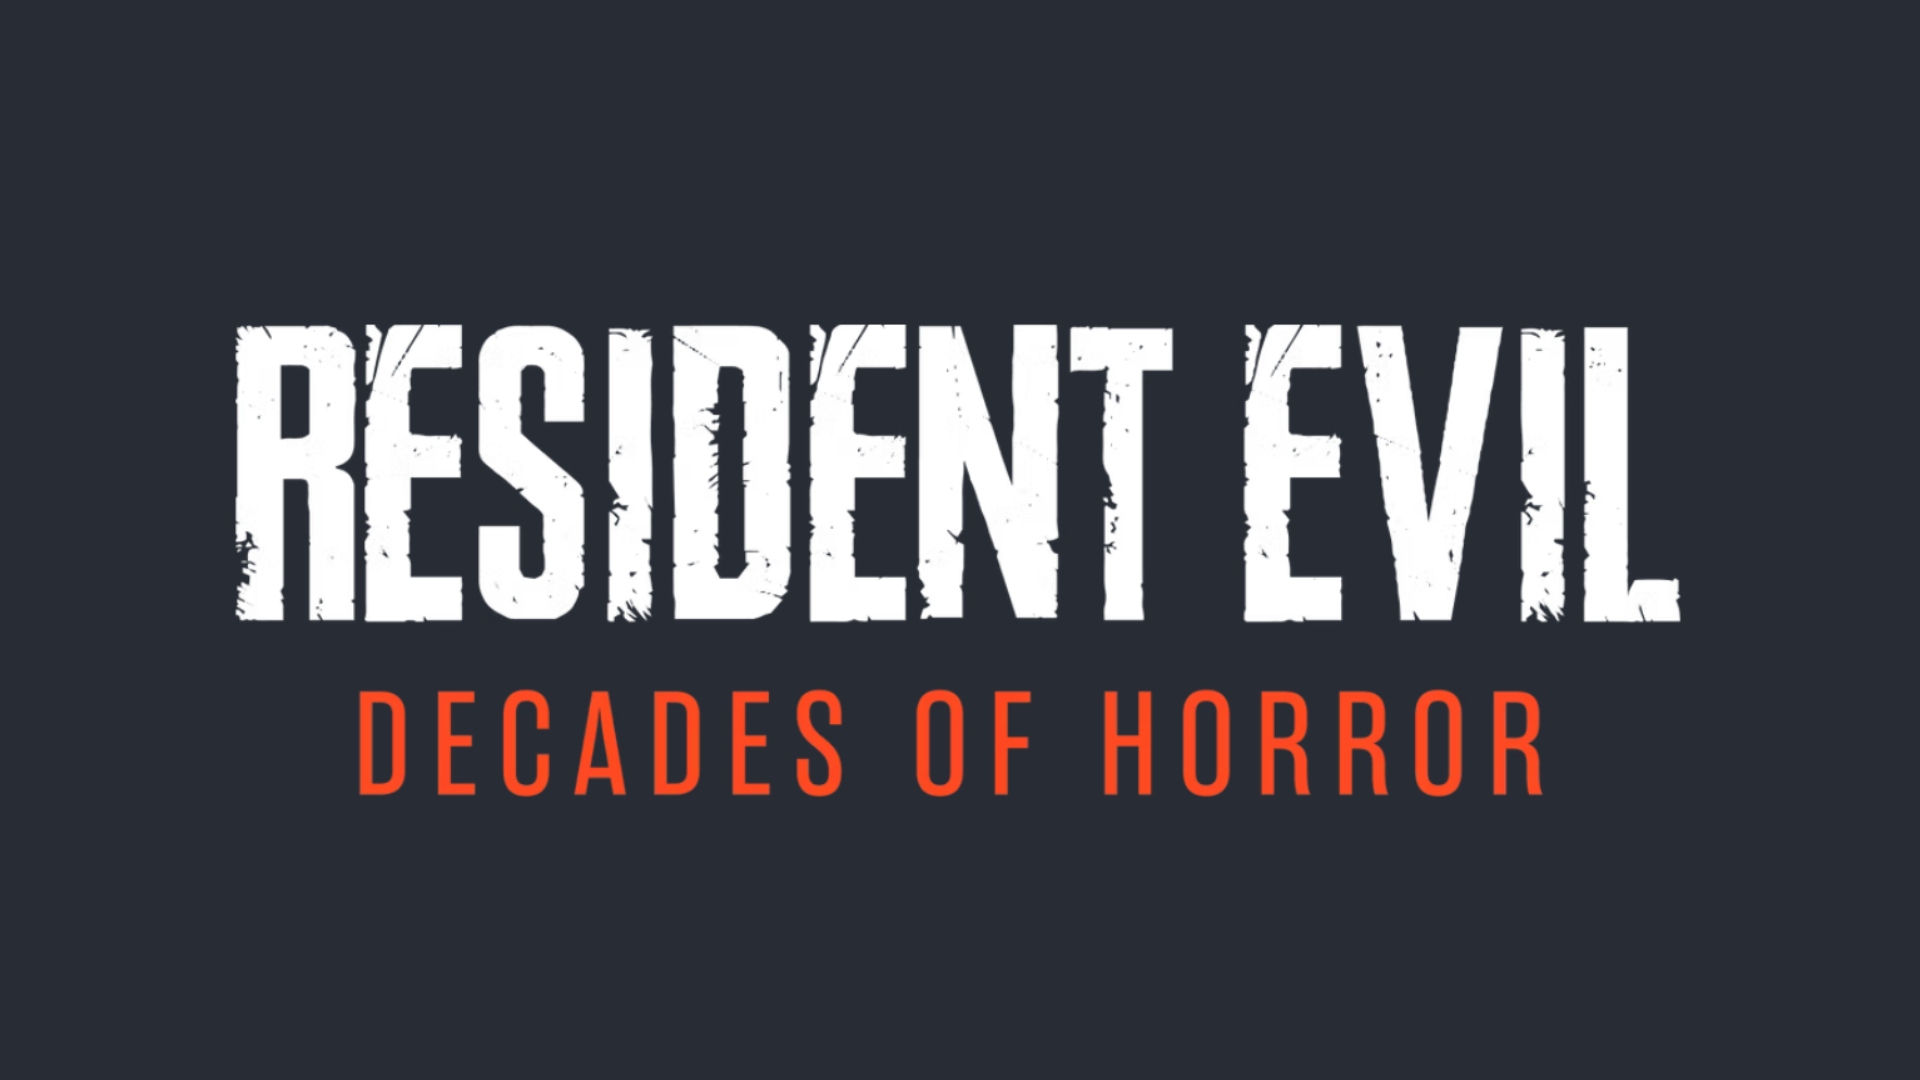 Humble Bundle Is Offering Ten Resident Evil Games For Just US$ 35